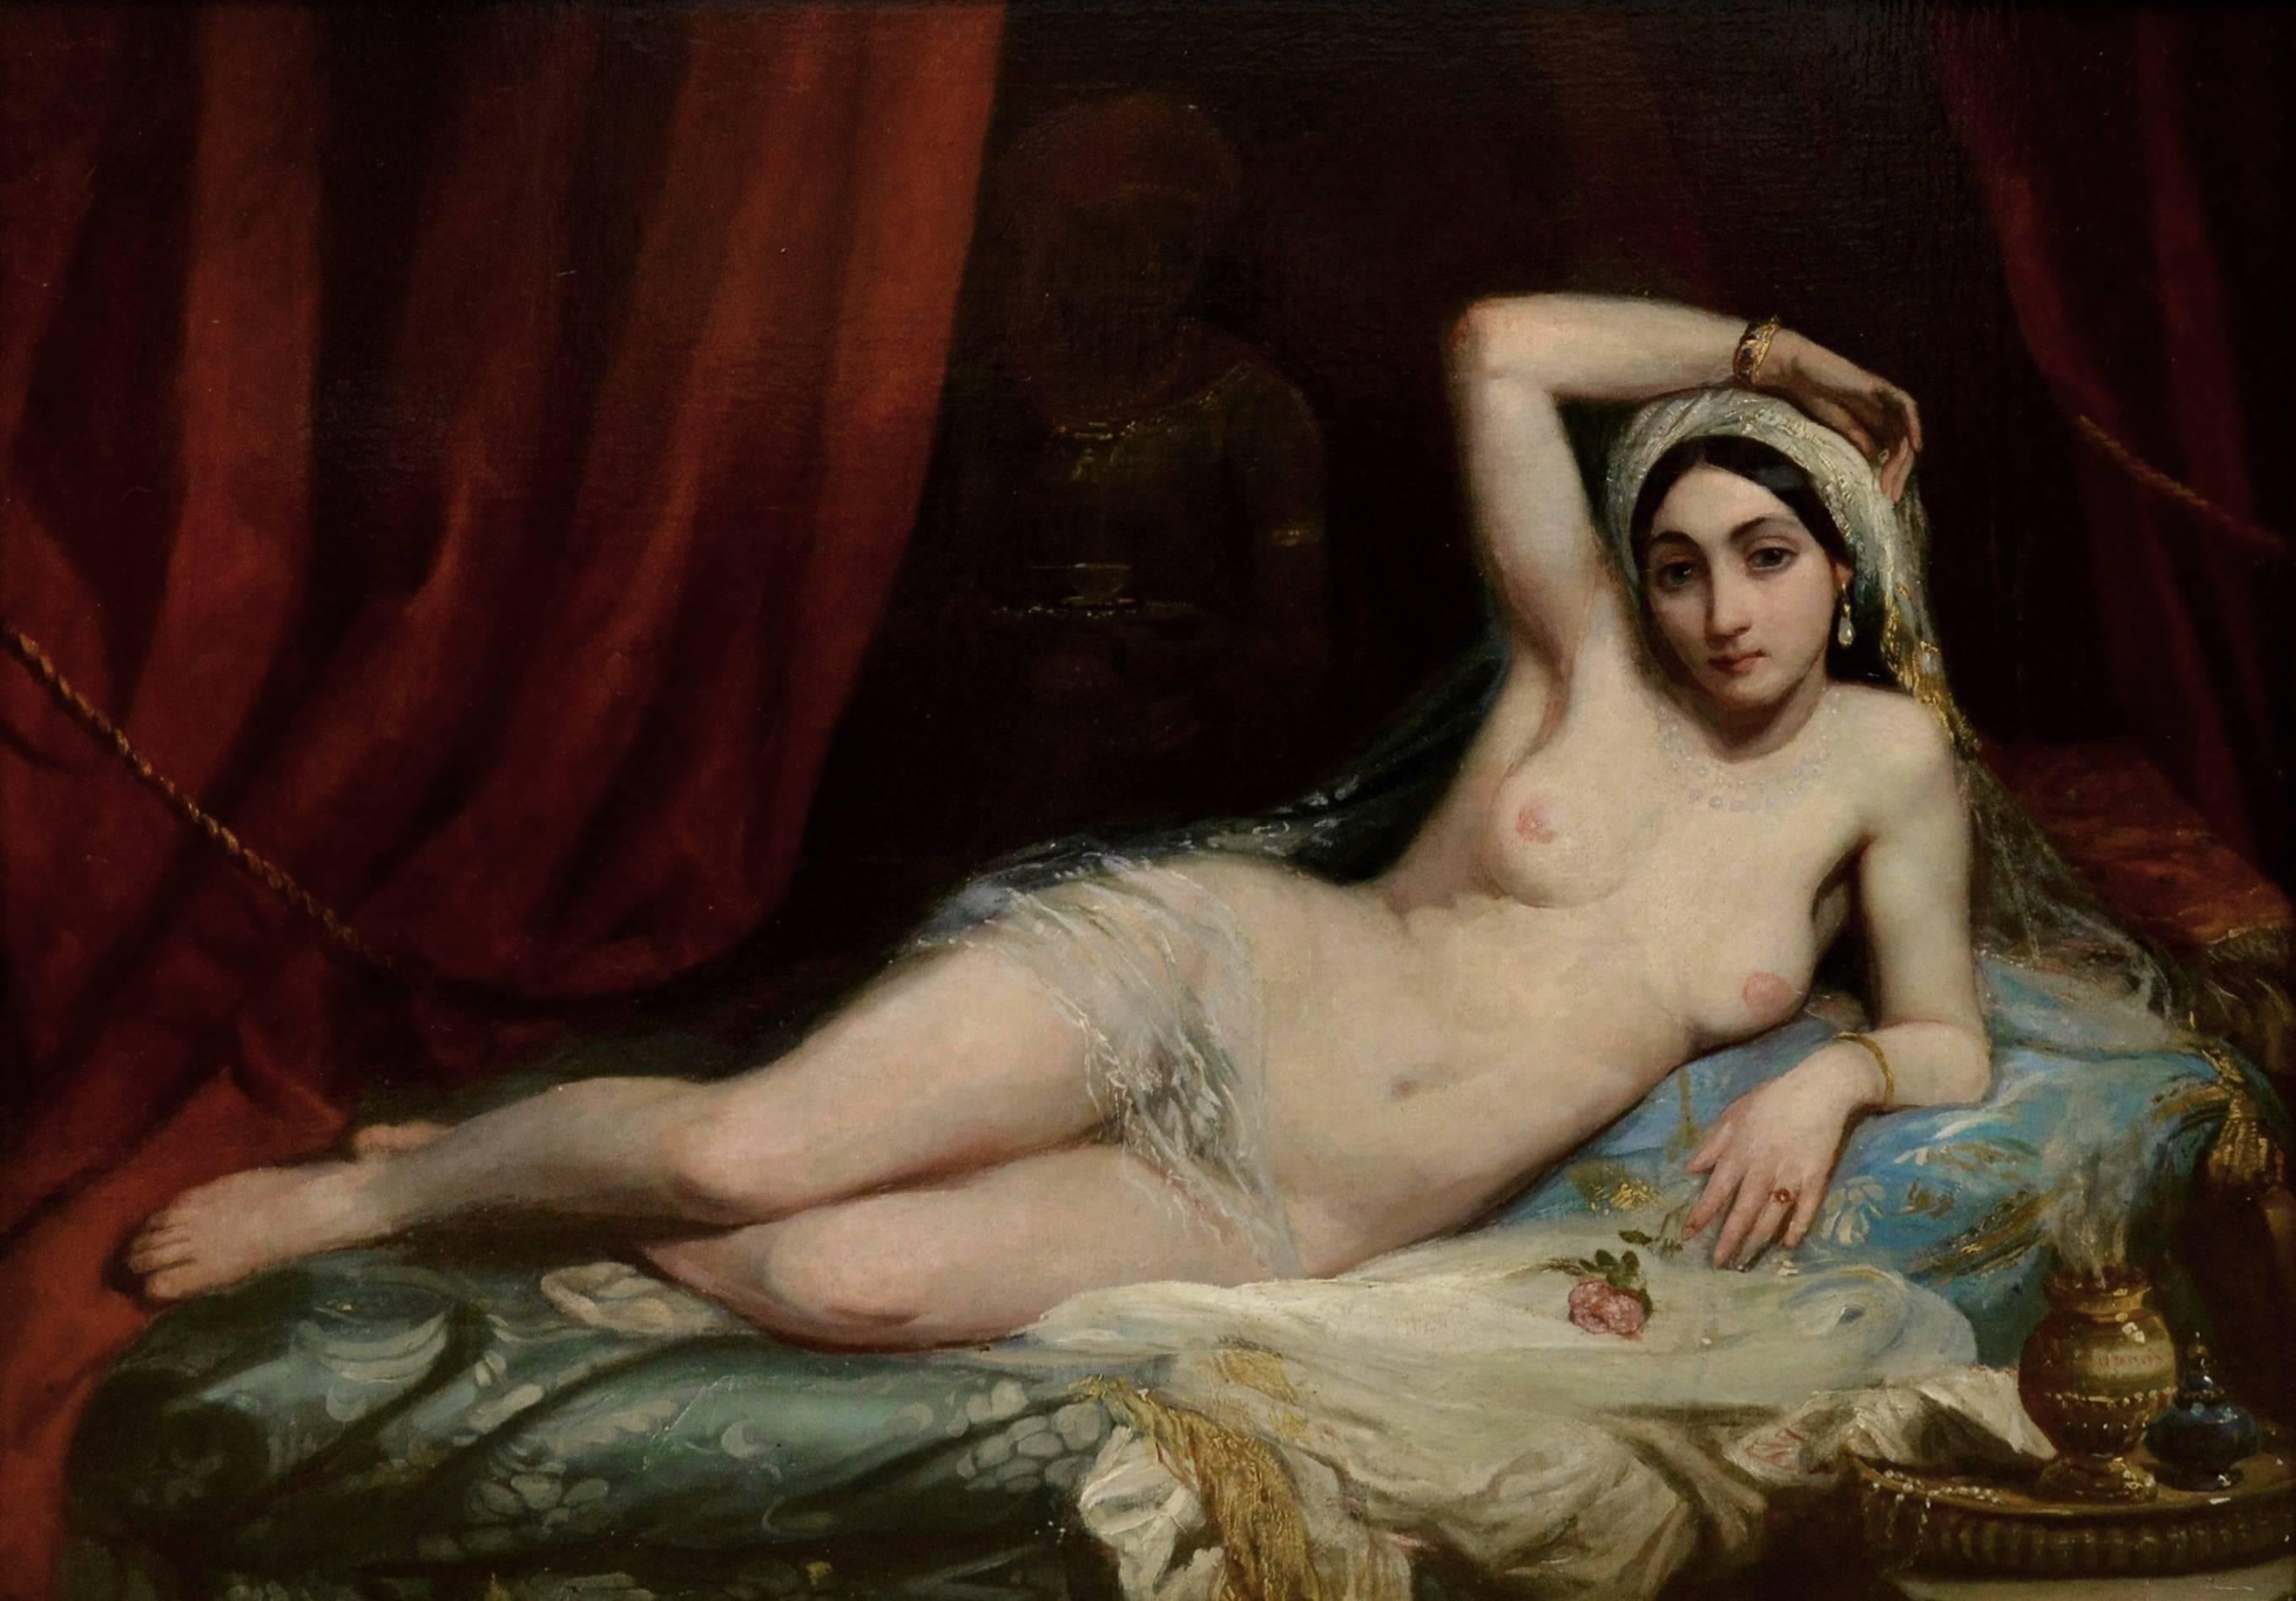 Une Odalisque - 19th Century French Orientalist Nude Oil Painting - Harem Girl 1